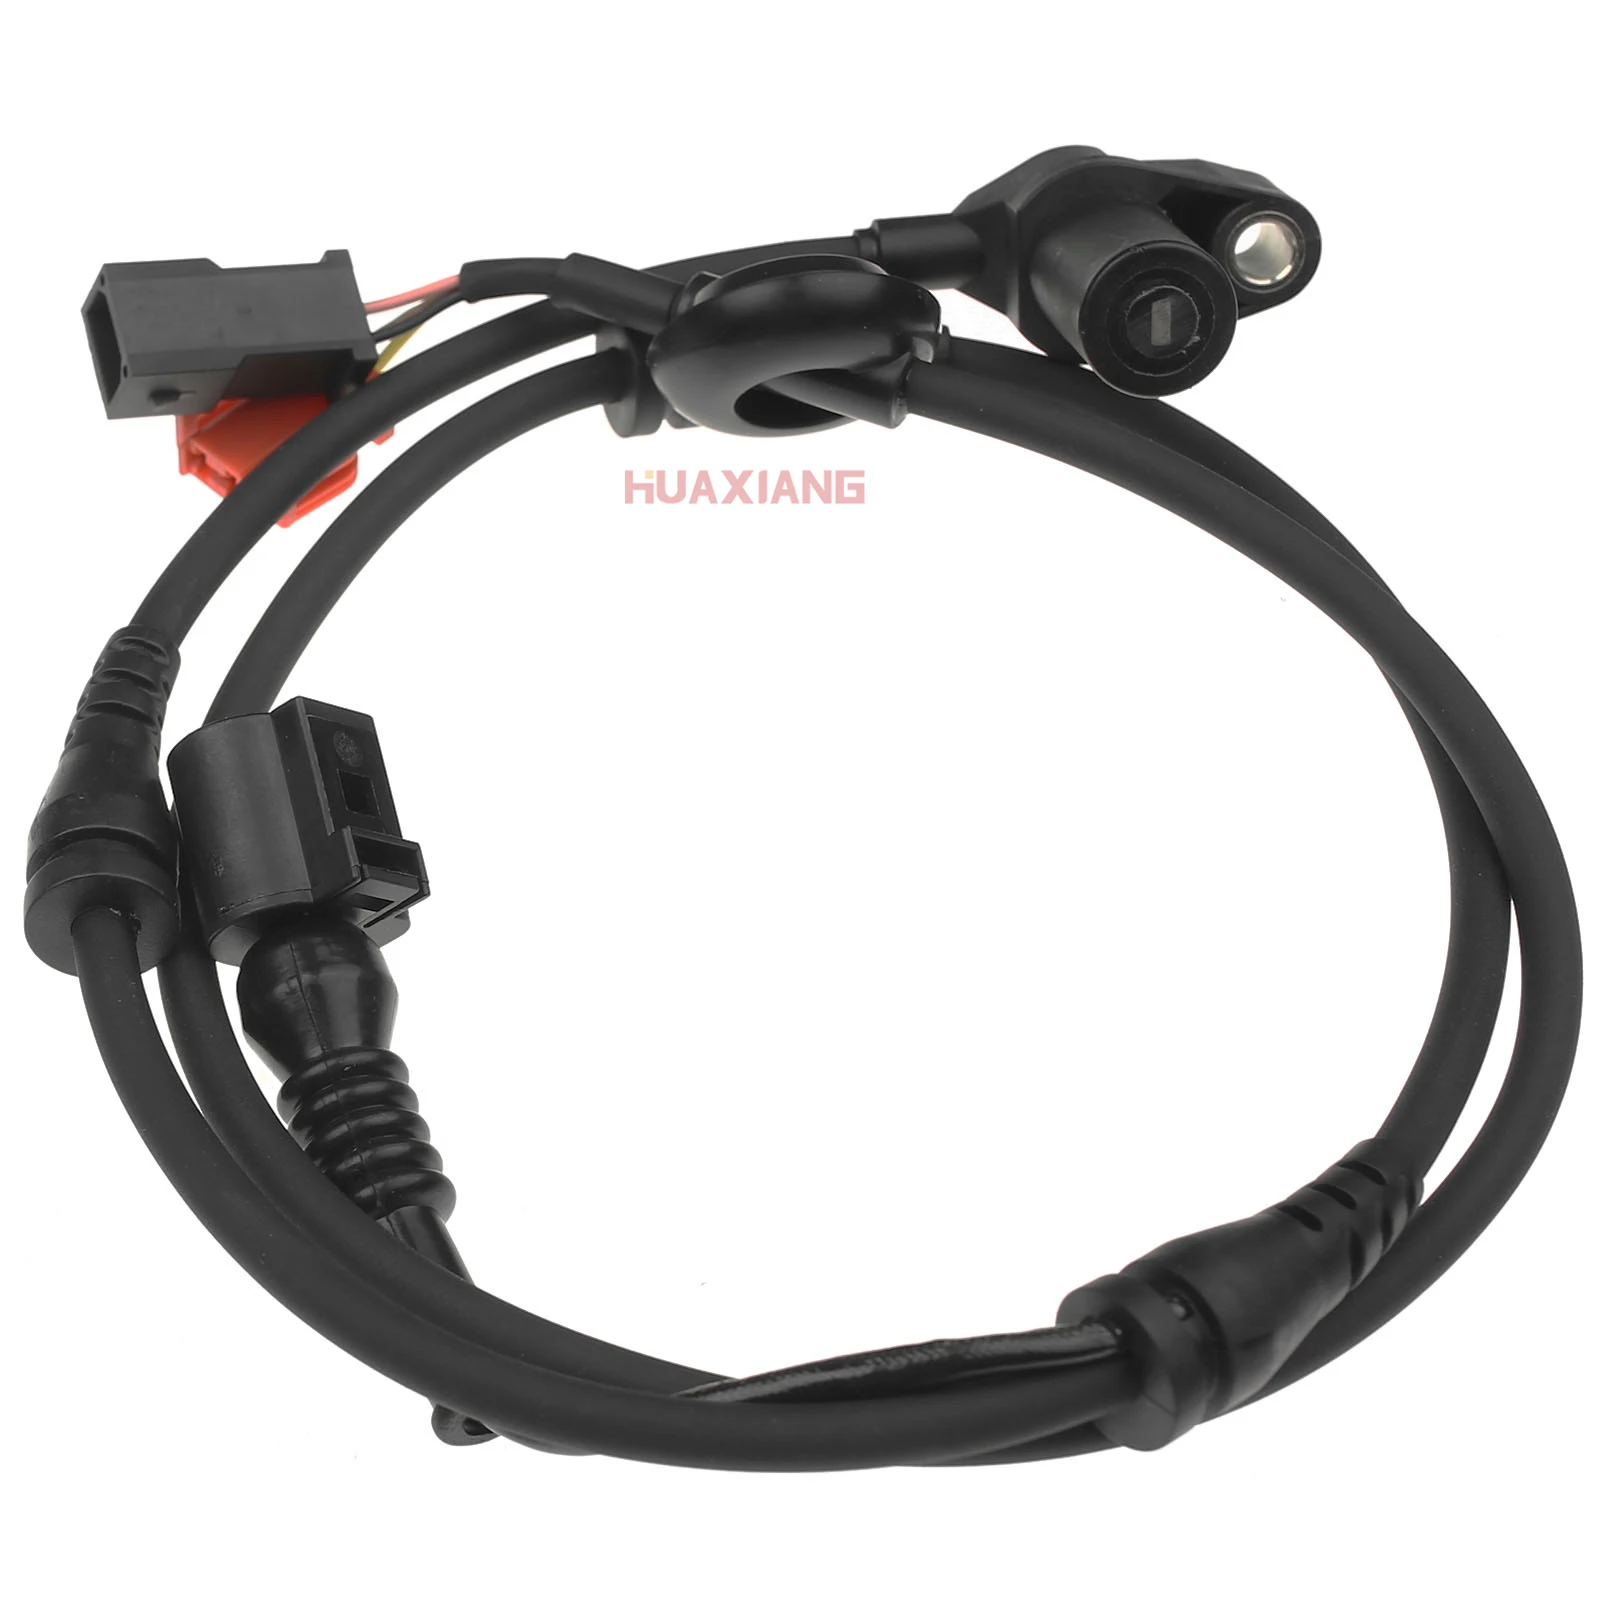 

A3 Automobile DE/GM ABS Wheel Speed Sensor for Audi A6 Quattro S4 S6 4B0927803B Front Left or Right